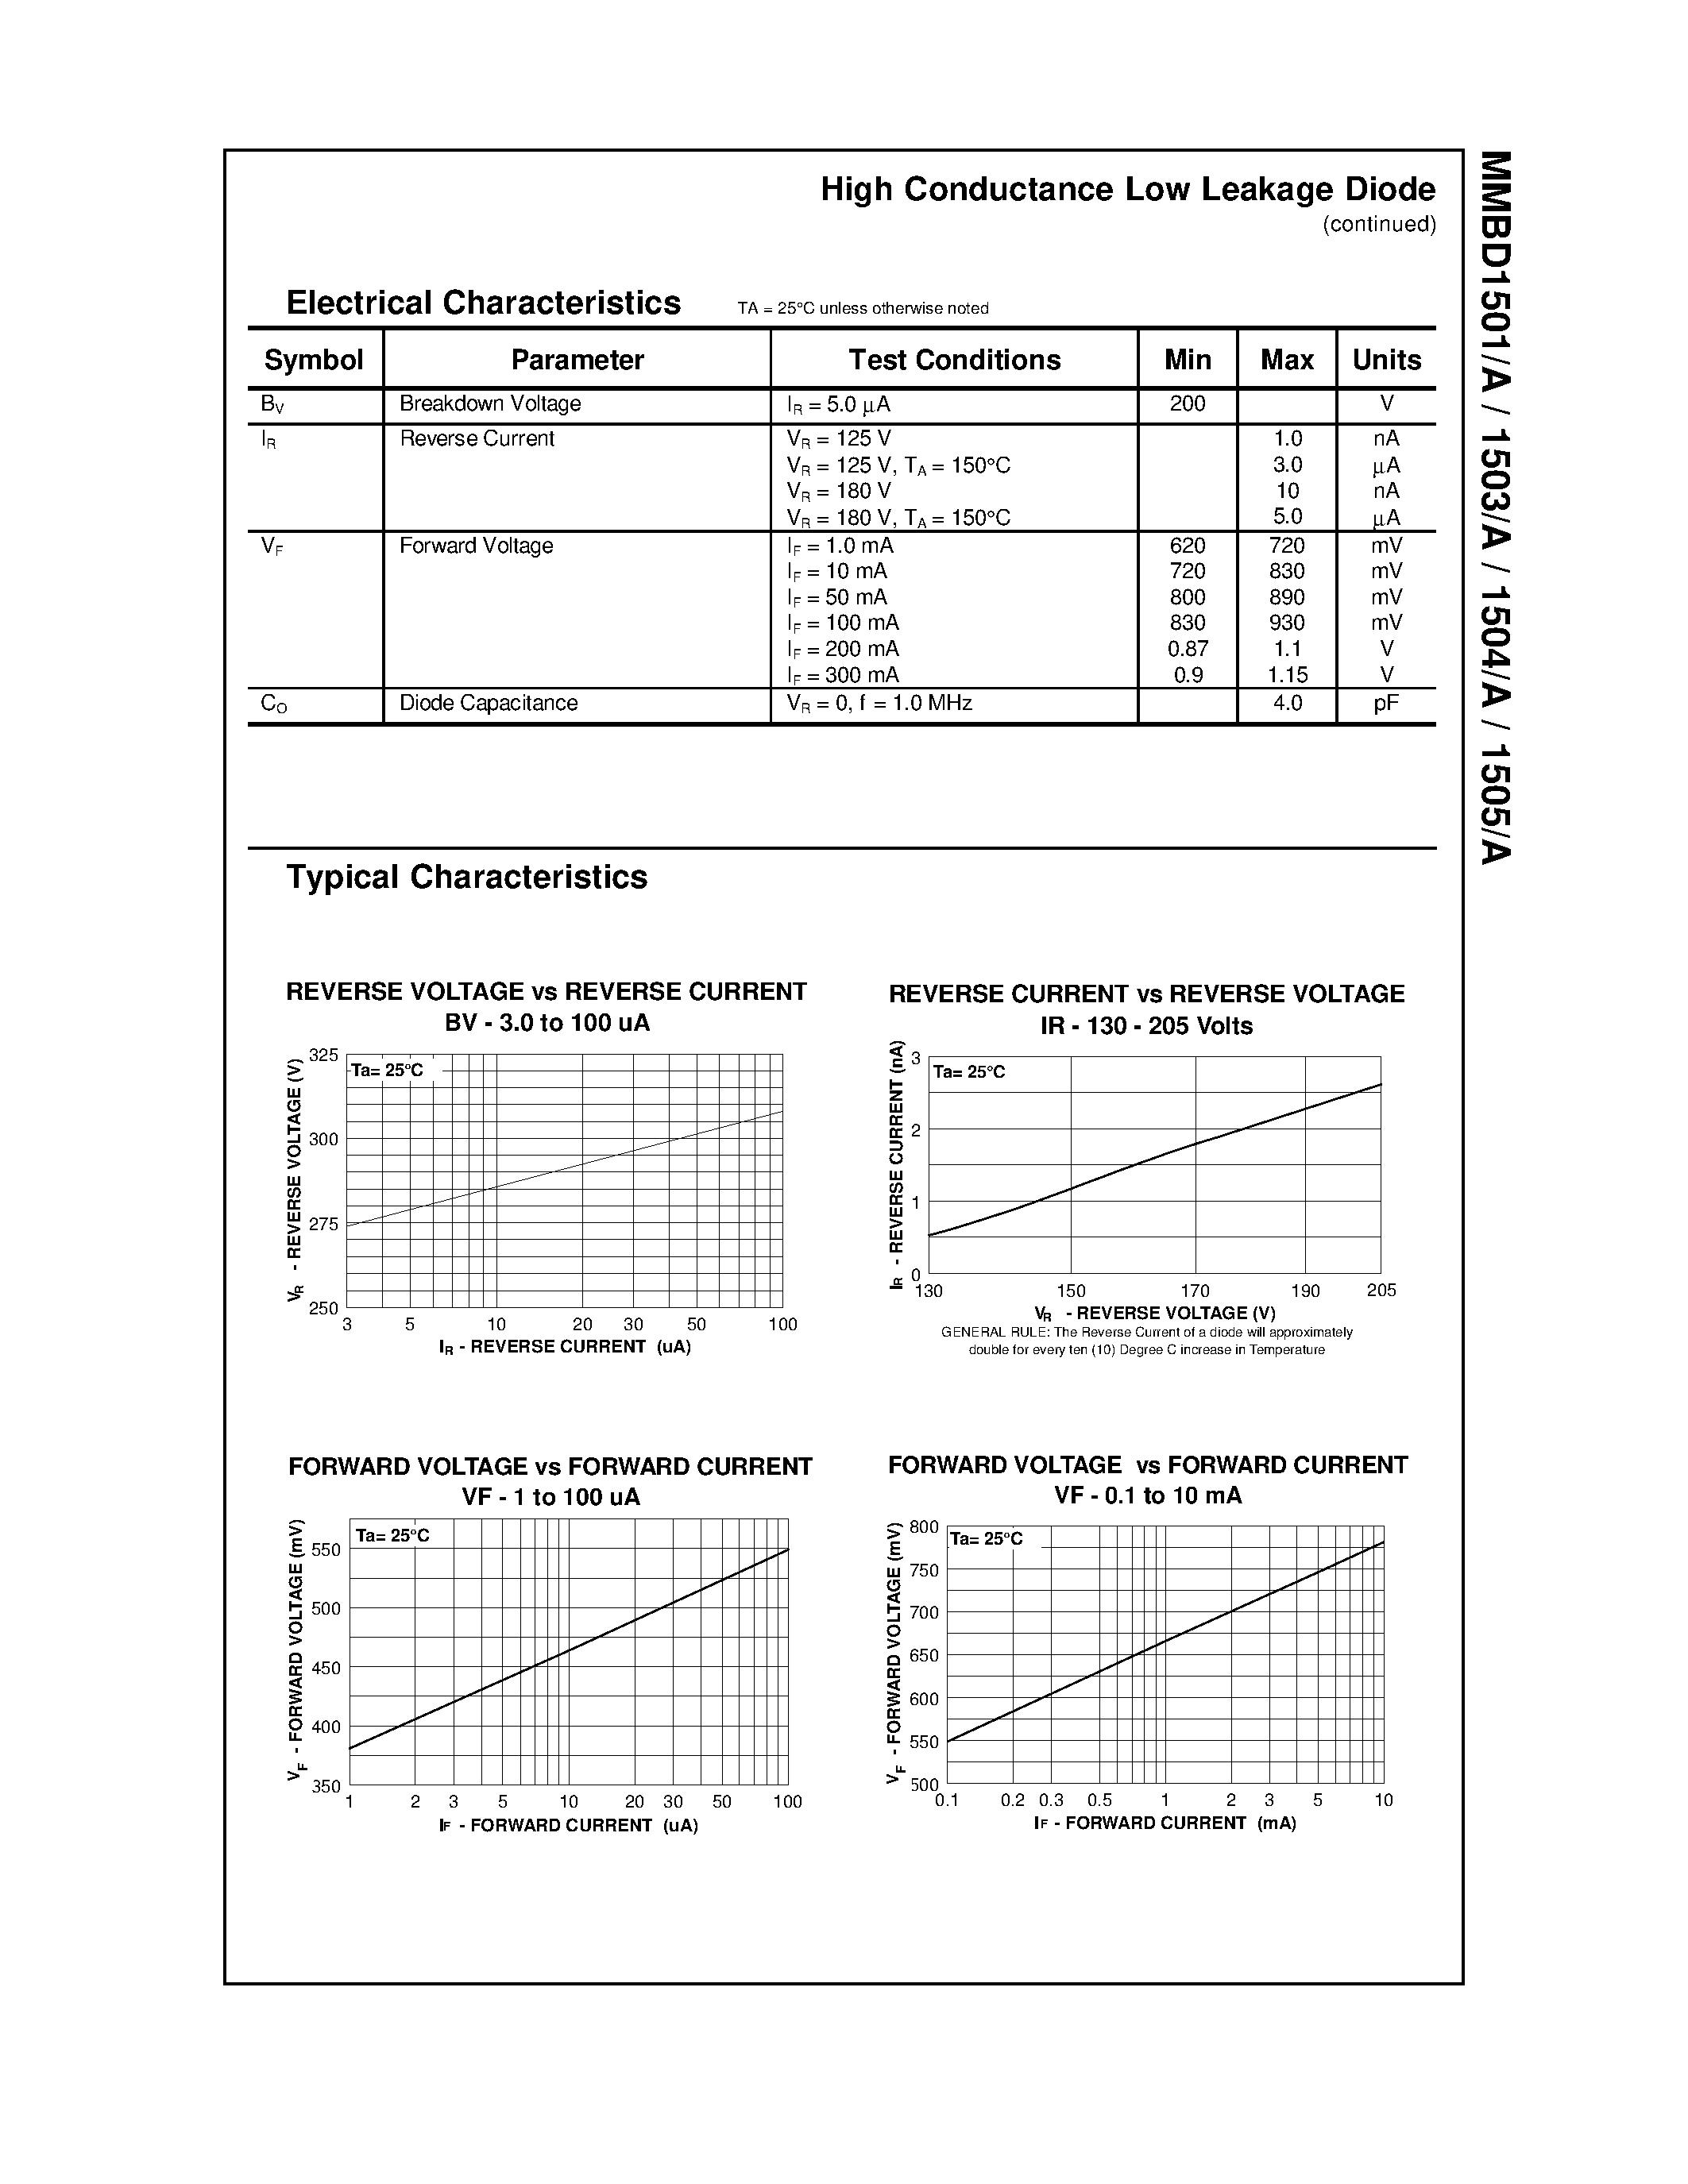 Datasheet MMBD1501 - High Conductance Low Leakage Diode page 2